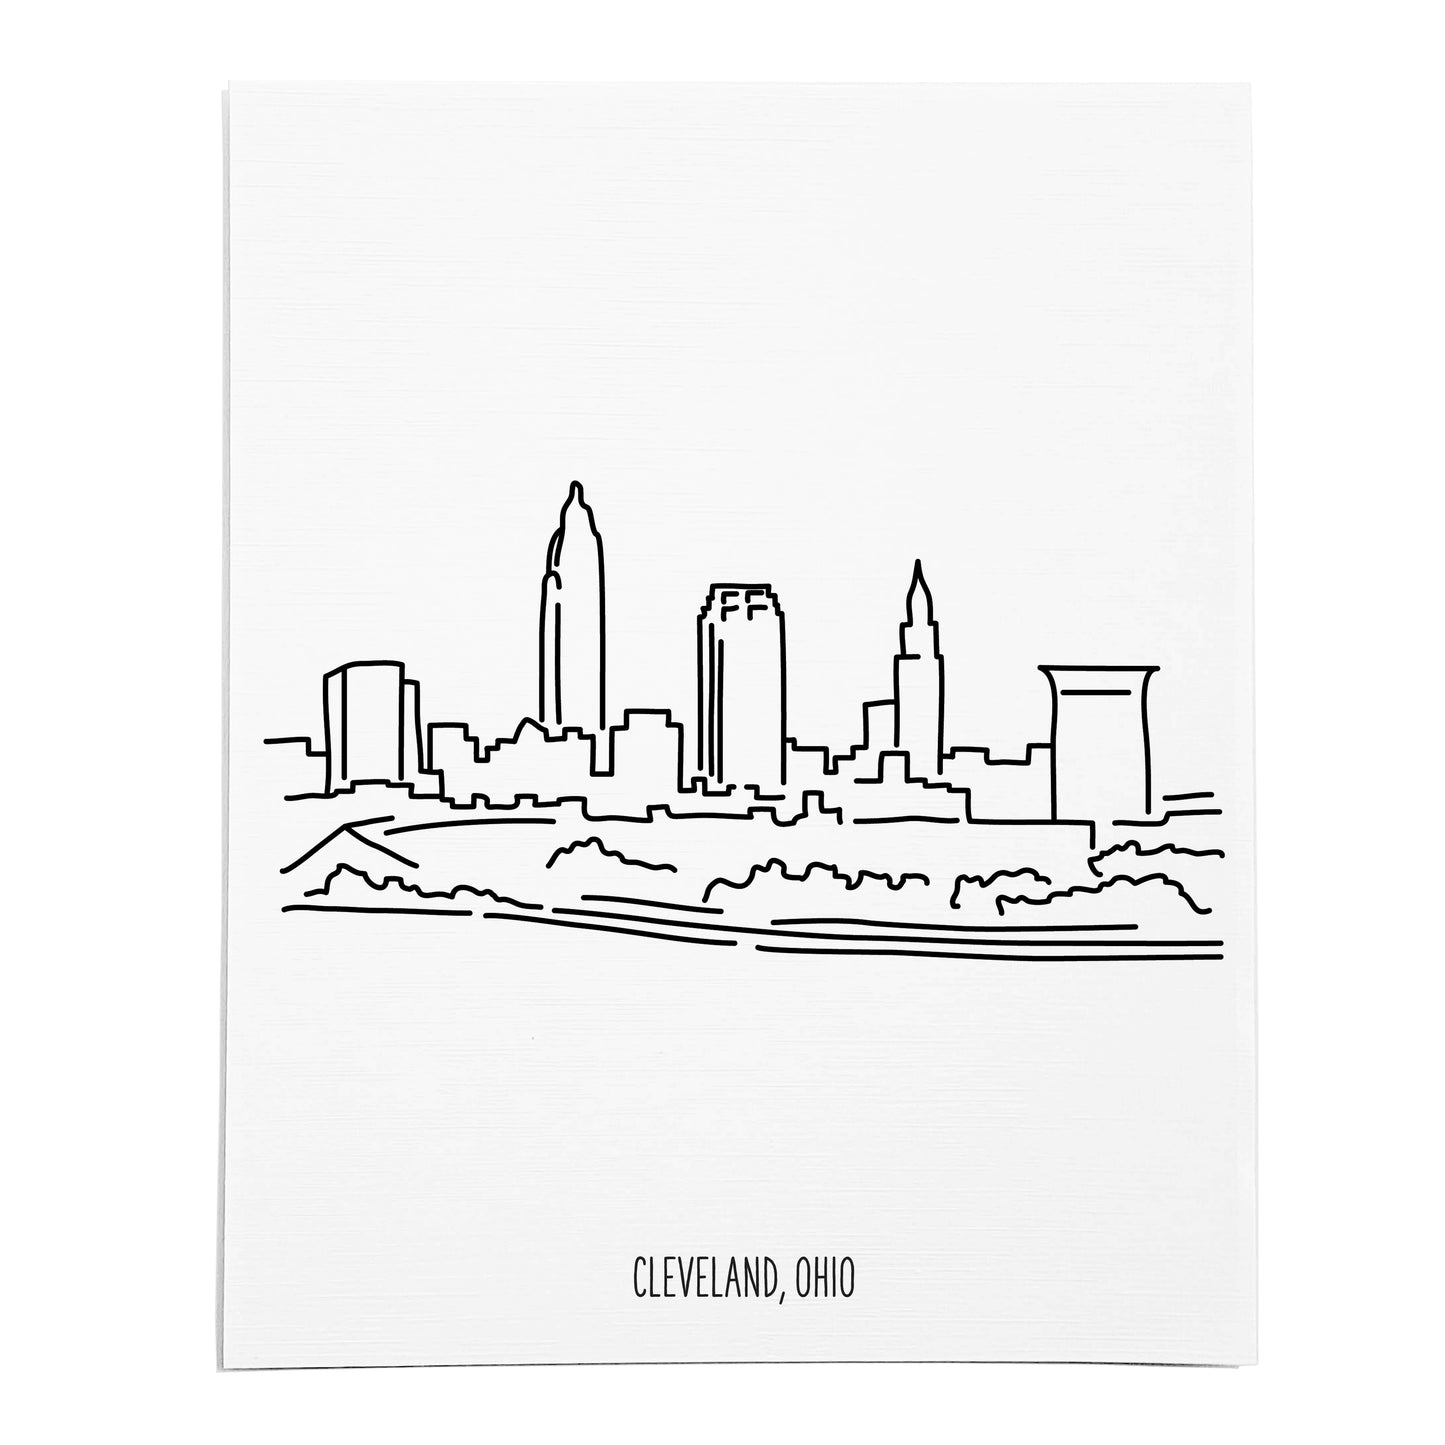 An art print featuring a line drawing of the Cleveland Skyline on white linen paper